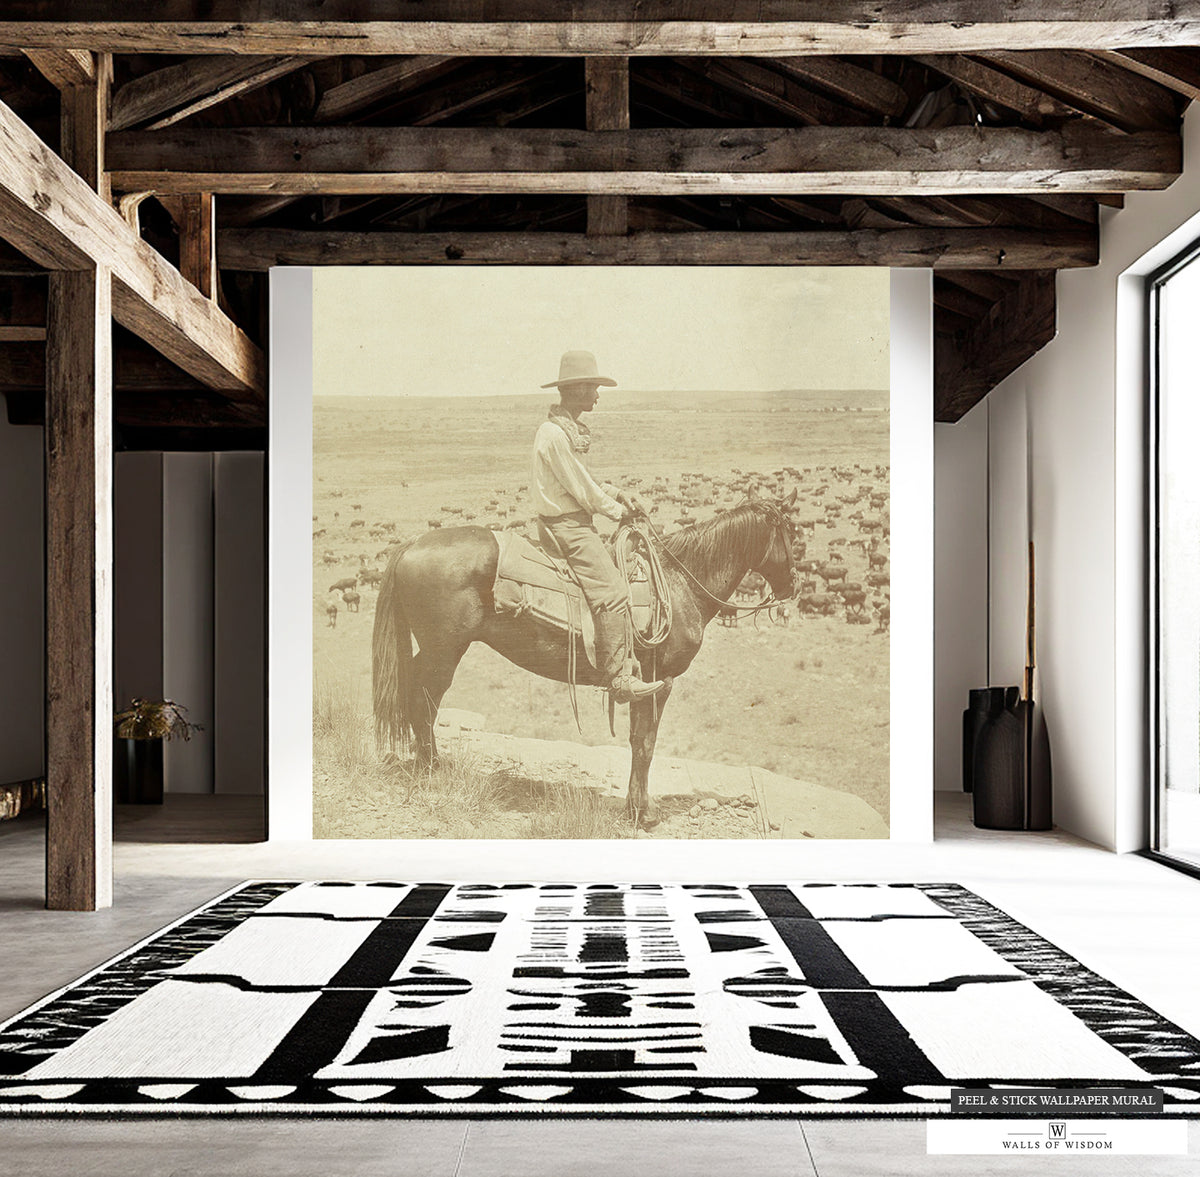 Rustic cowboy rancher wallpaper mural, perfect for Western-themed interiors.